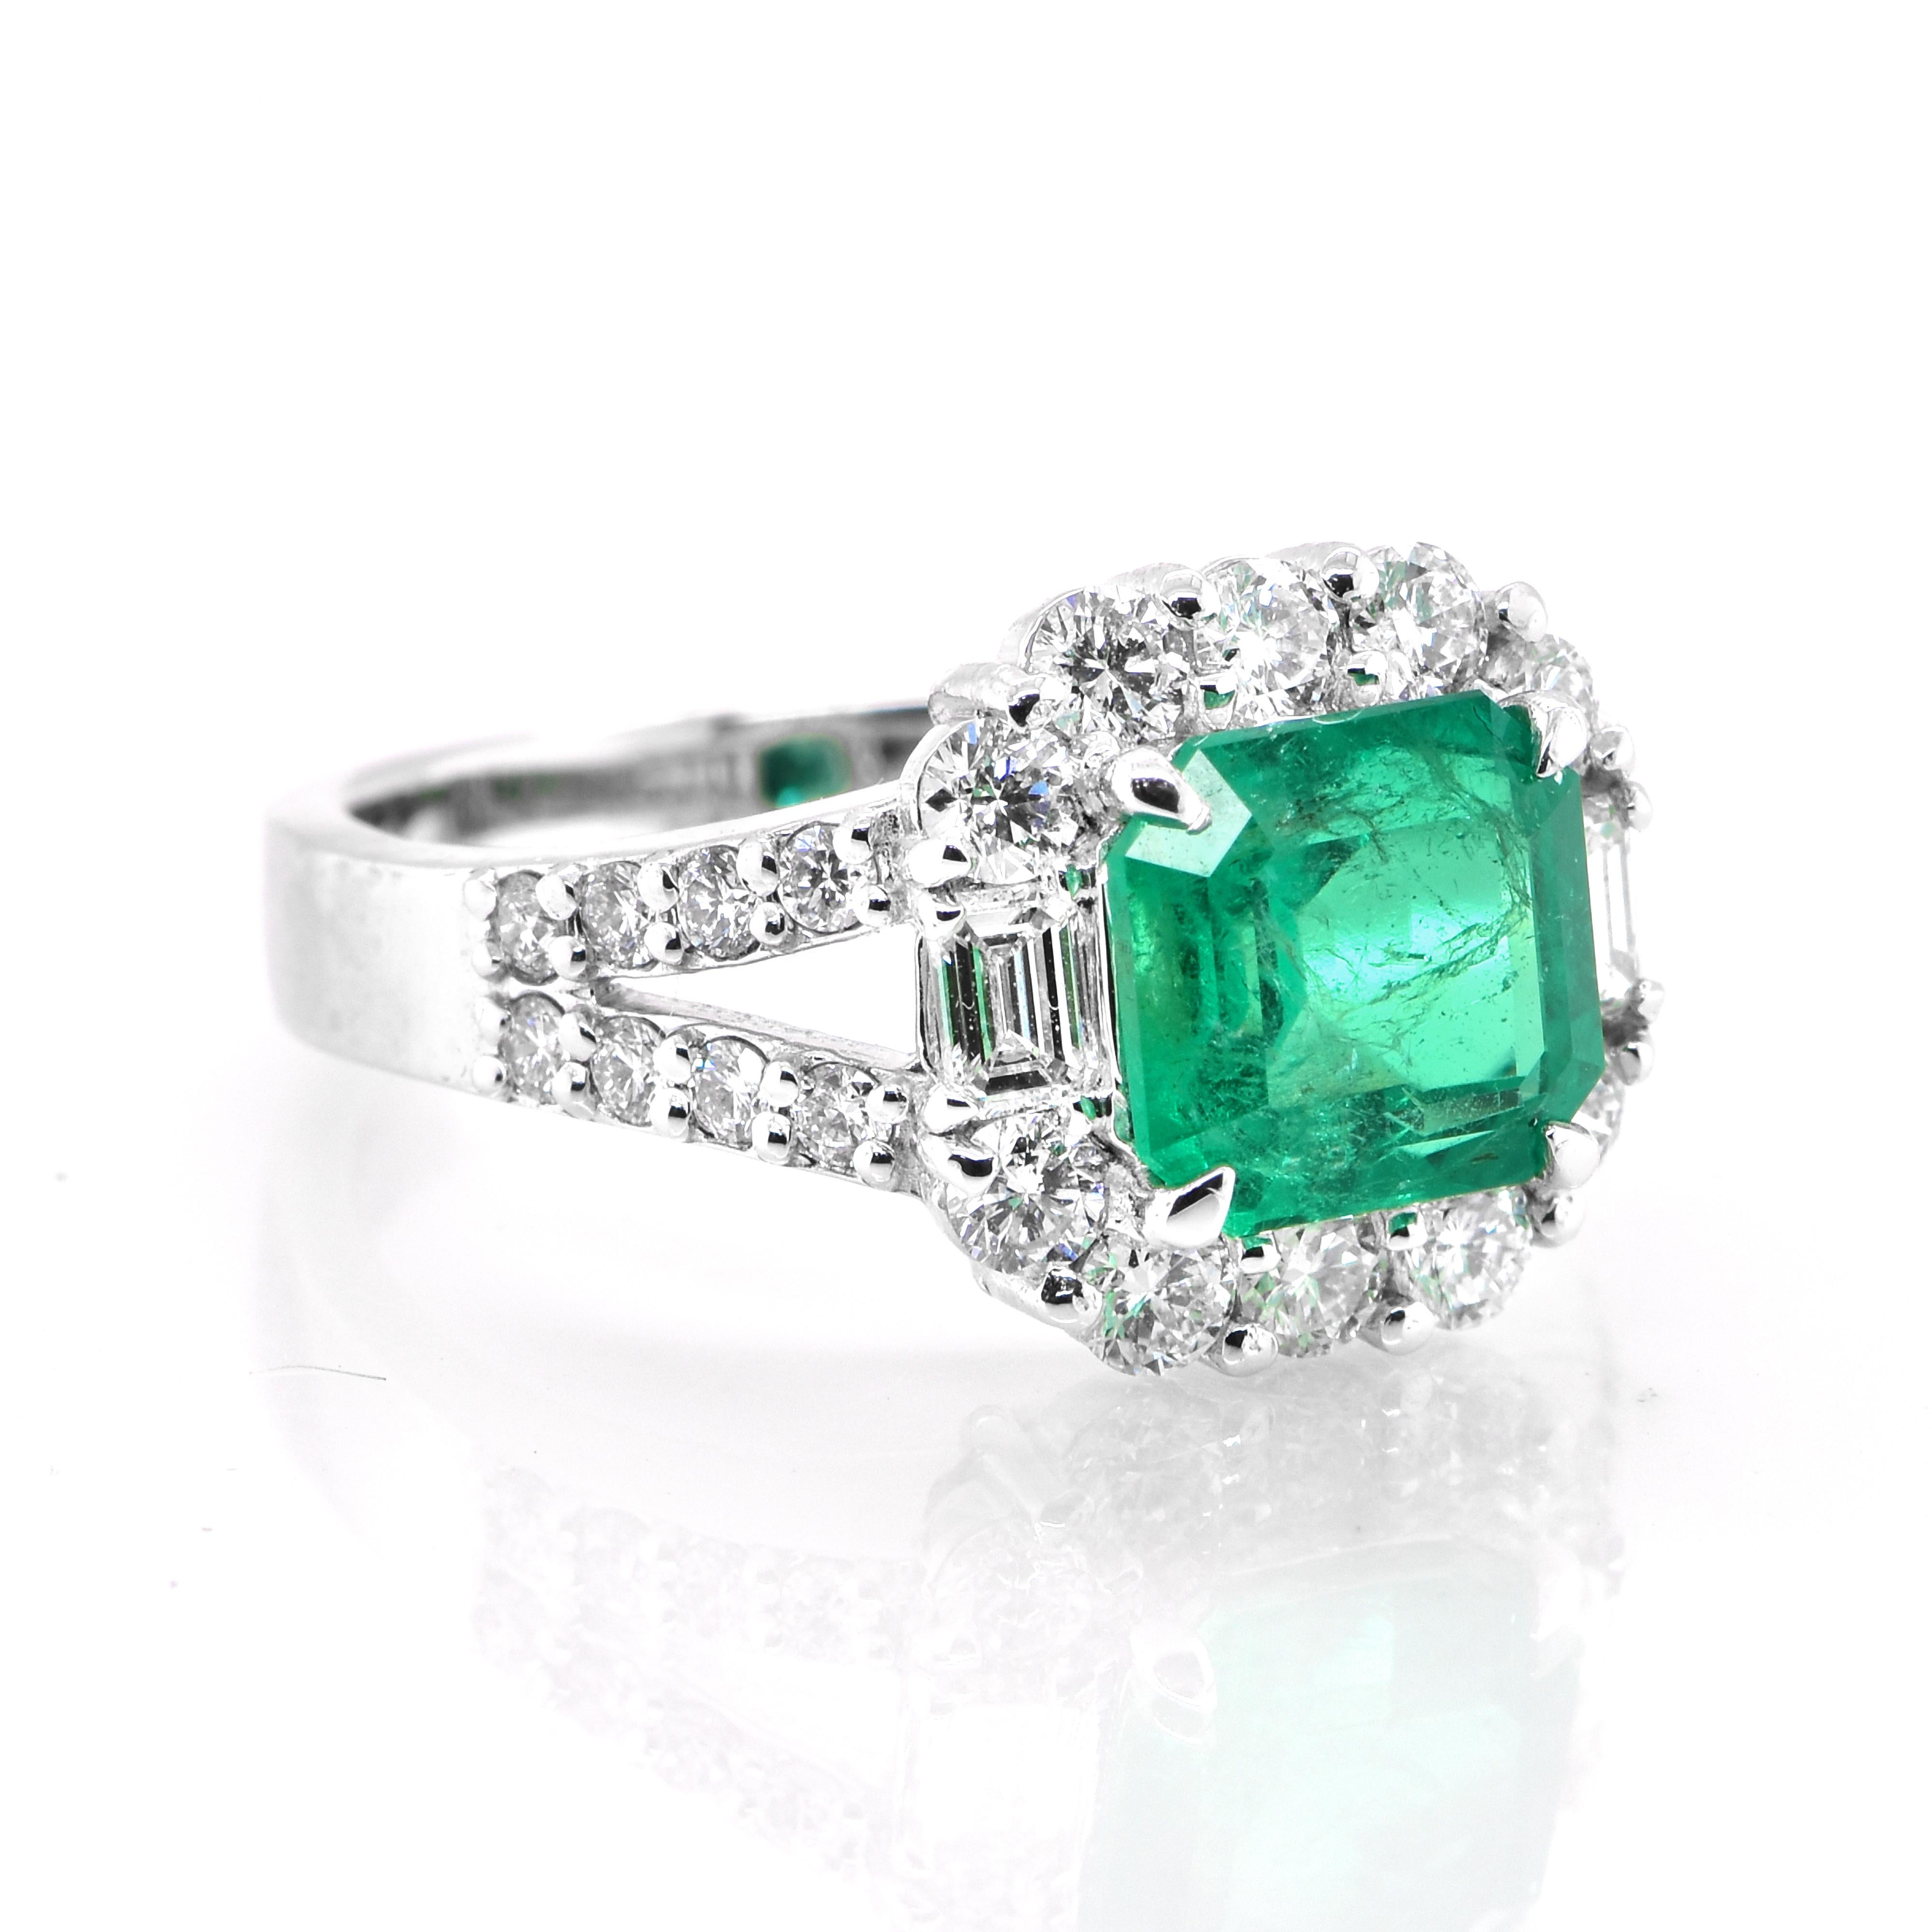 Modern 1.97 Carat Natural Colombian Emerald and Diamond Ring Made in Platinum For Sale